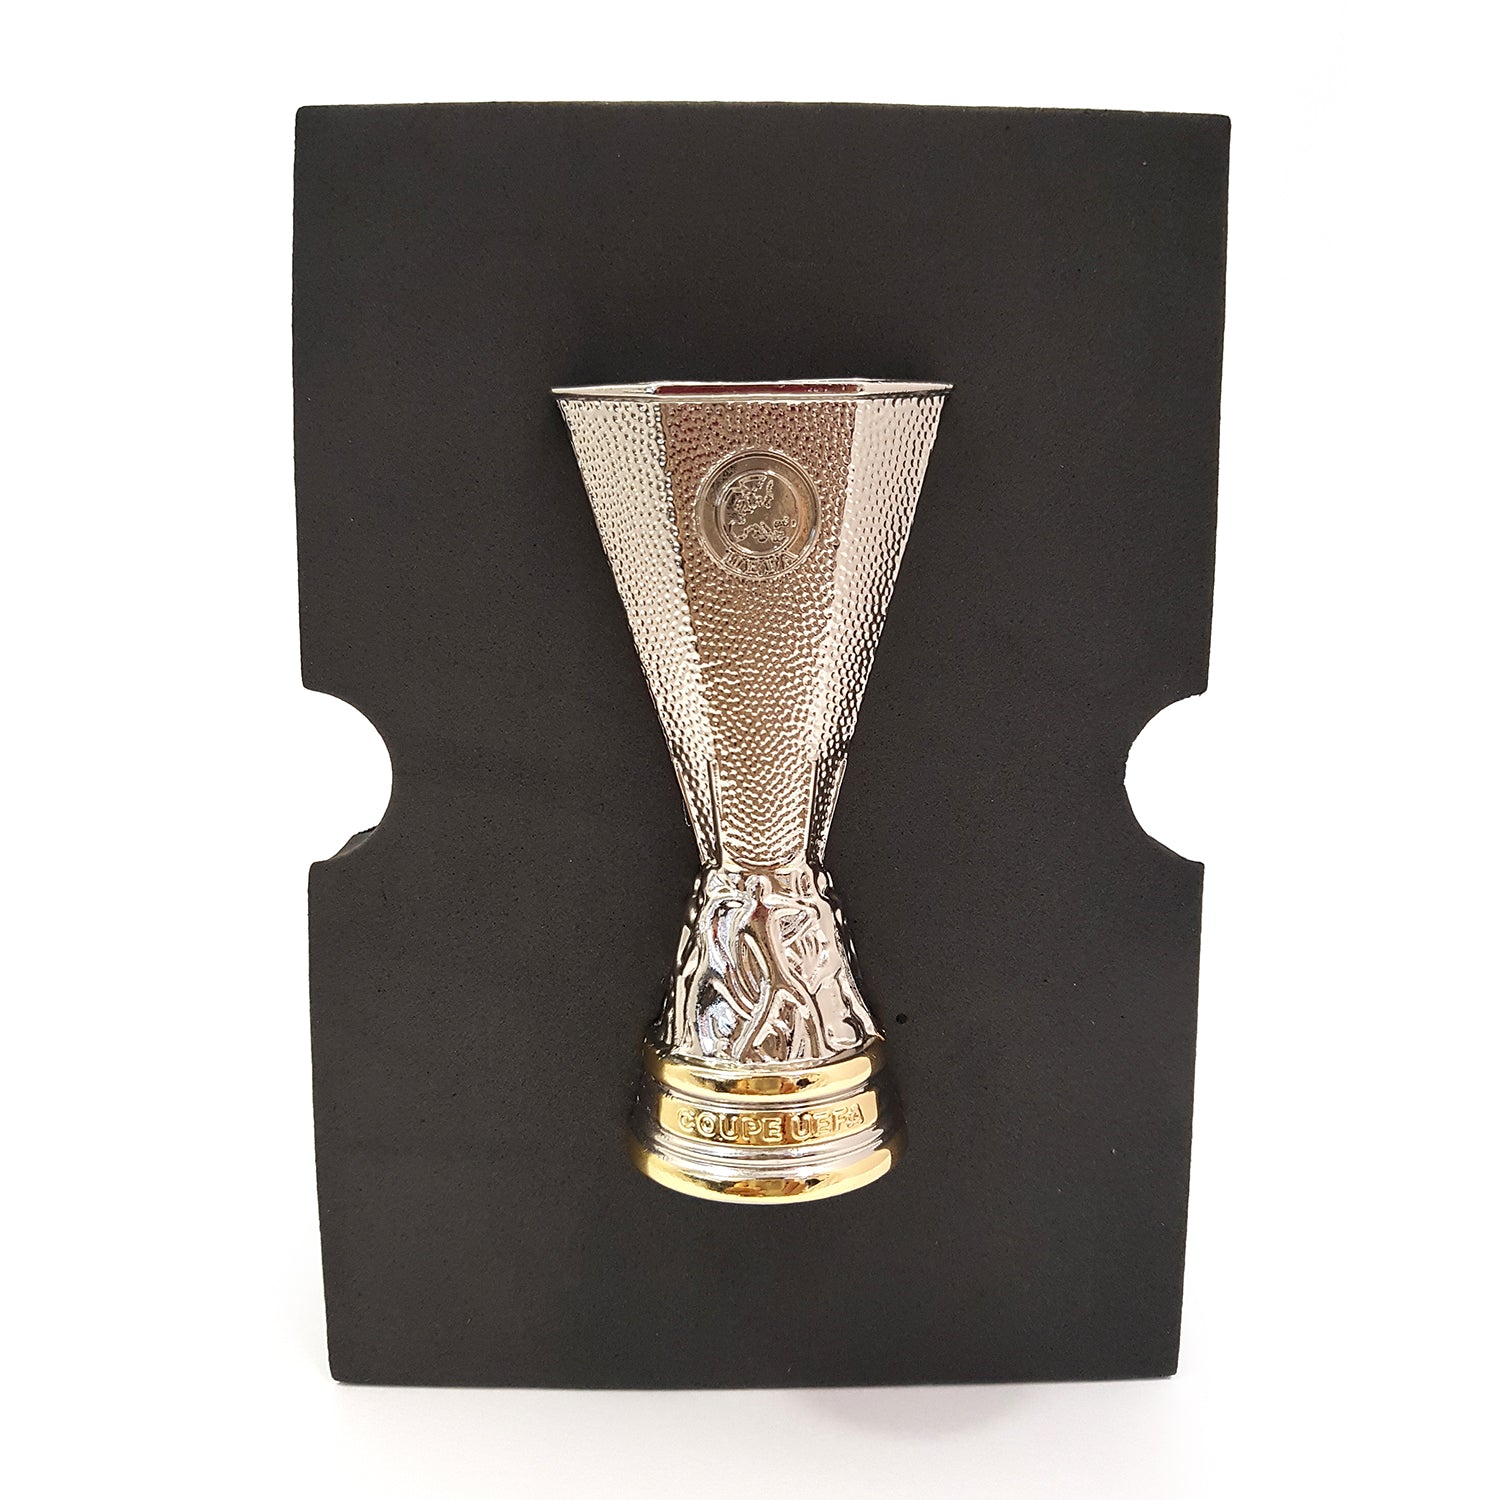 UEFA Europa League 150mm 3D Replica Trophy UEFA Club Competitions Online Store